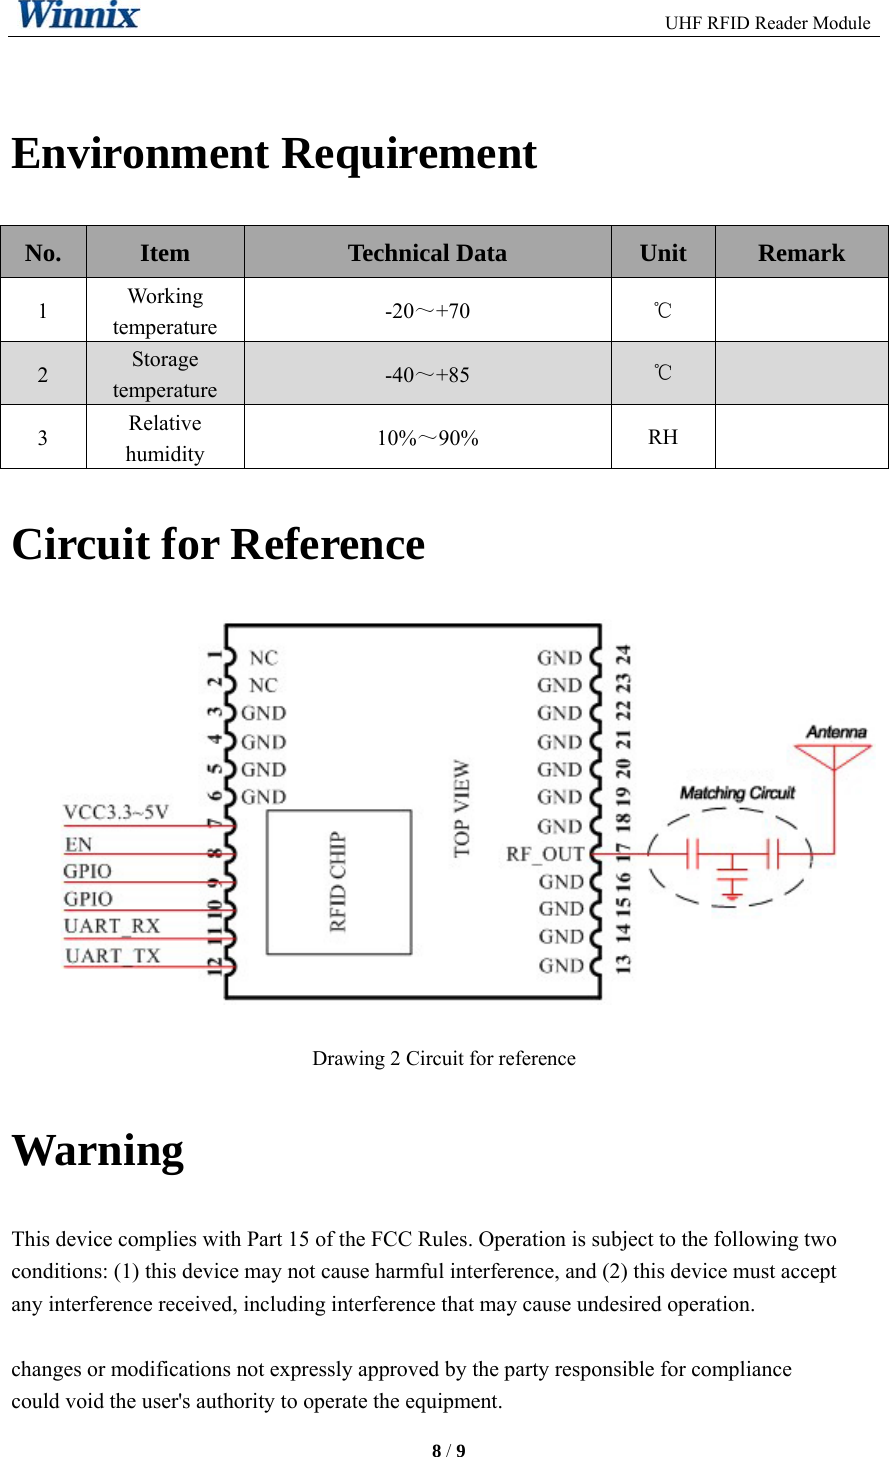                                                         UHF RFID Reader Module     8 / 9     Environment Requirement No.  Item  Technical Data  Unit  Remark 1  Working temperature  -20～+70  ℃  2  Storage temperature  -40～+85  ℃  3  Relative humidity  10%～90%  RH   Circuit for Reference  Drawing 2 Circuit for reference   Warning This device complies with Part 15 of the FCC Rules. Operation is subject to the following two conditions: (1) this device may not cause harmful interference, and (2) this device must accept any interference received, including interference that may cause undesired operation.    changes or modifications not expressly approved by the party responsible for compliance could void the user&apos;s authority to operate the equipment. 